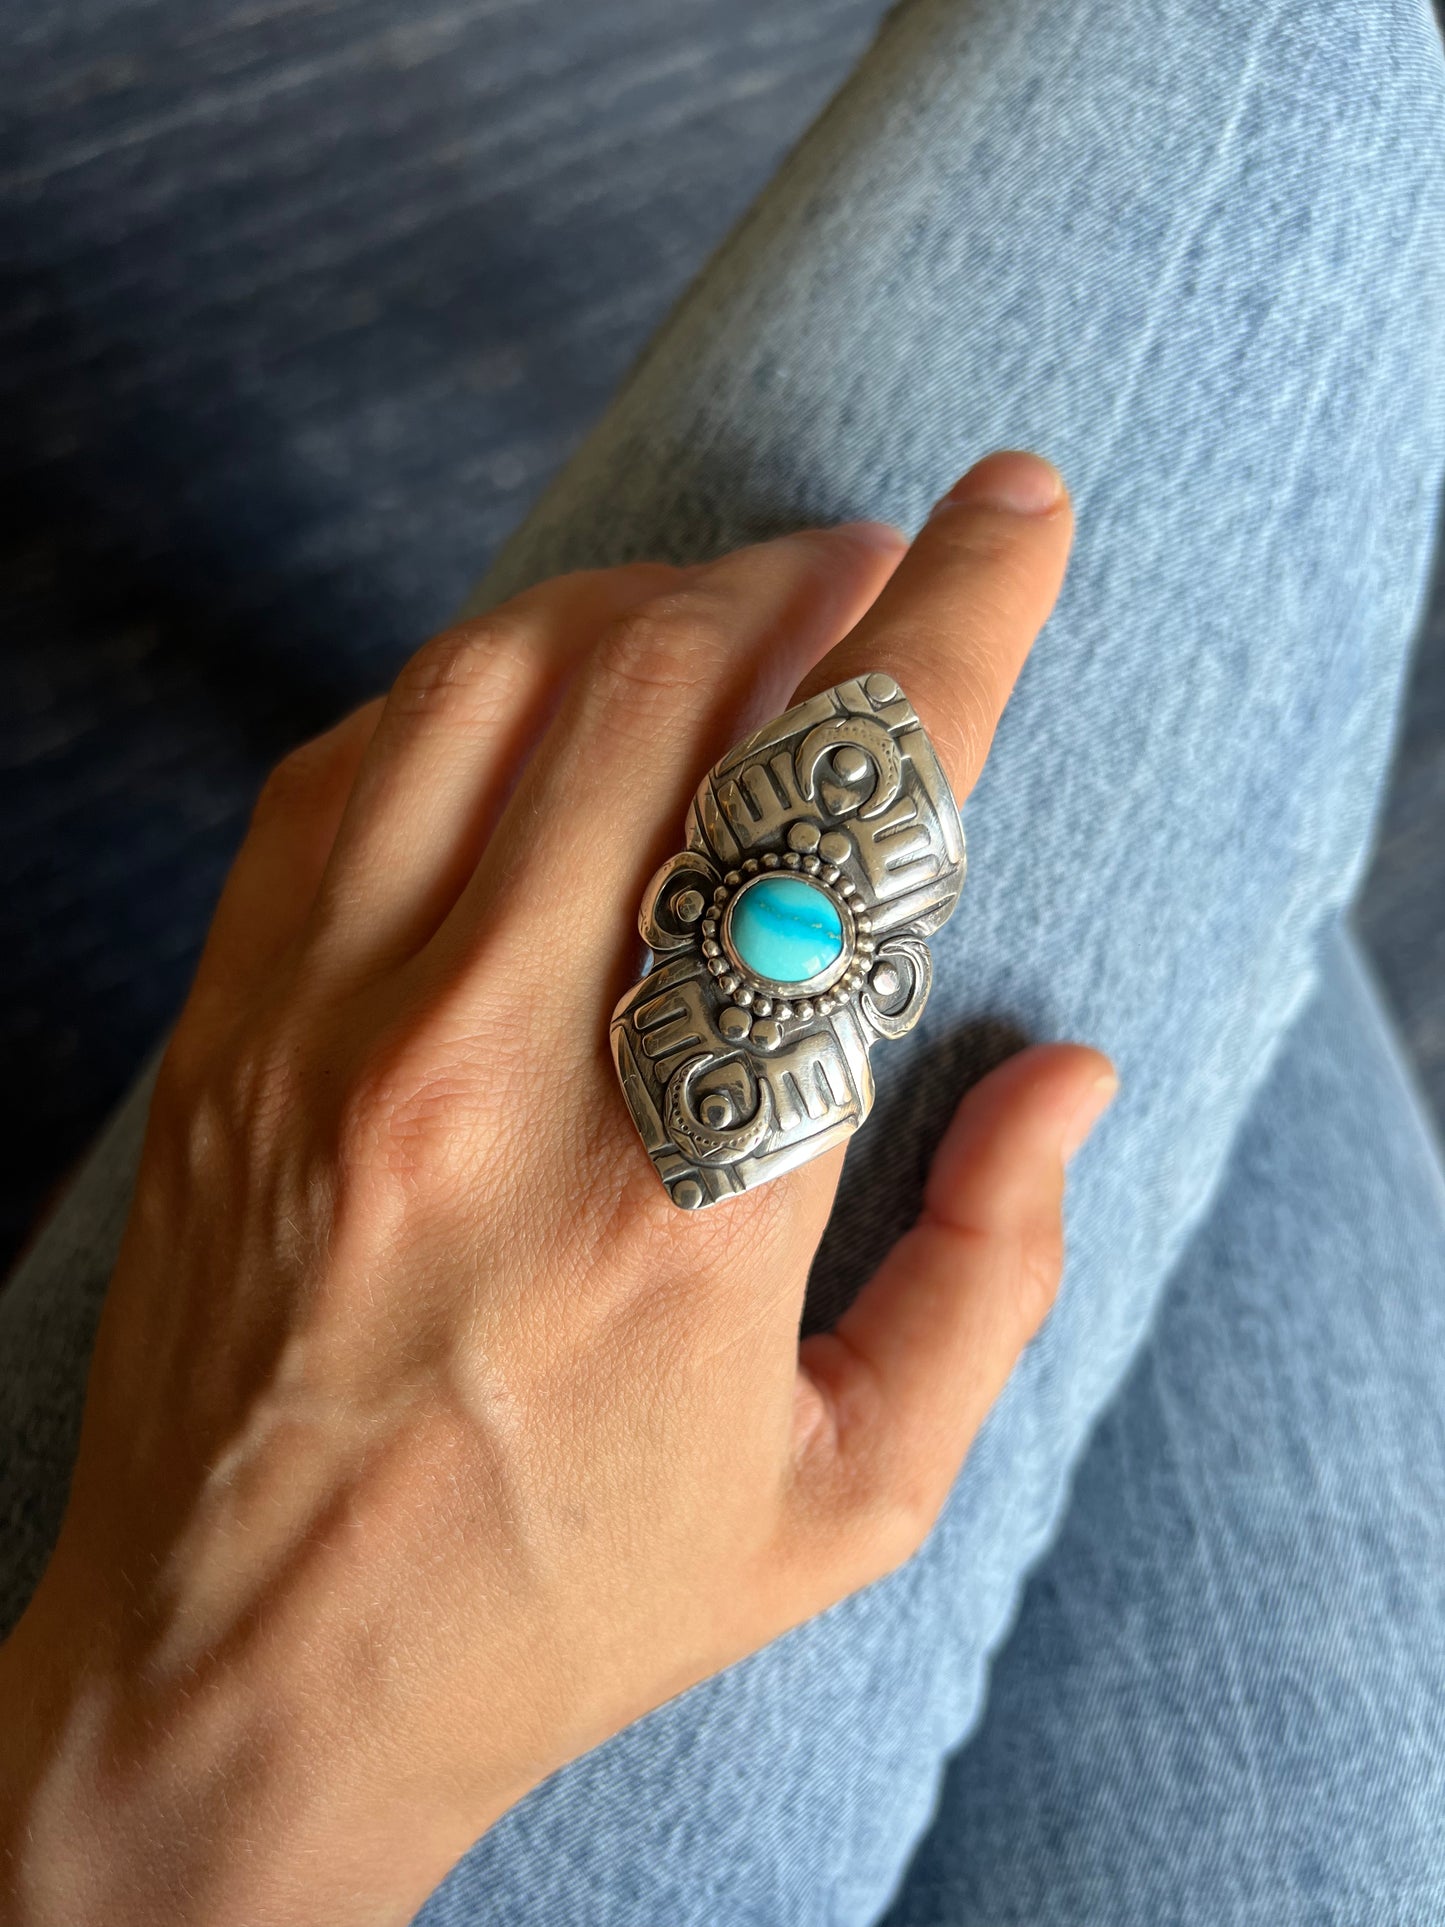 "Give me some western" boho ring